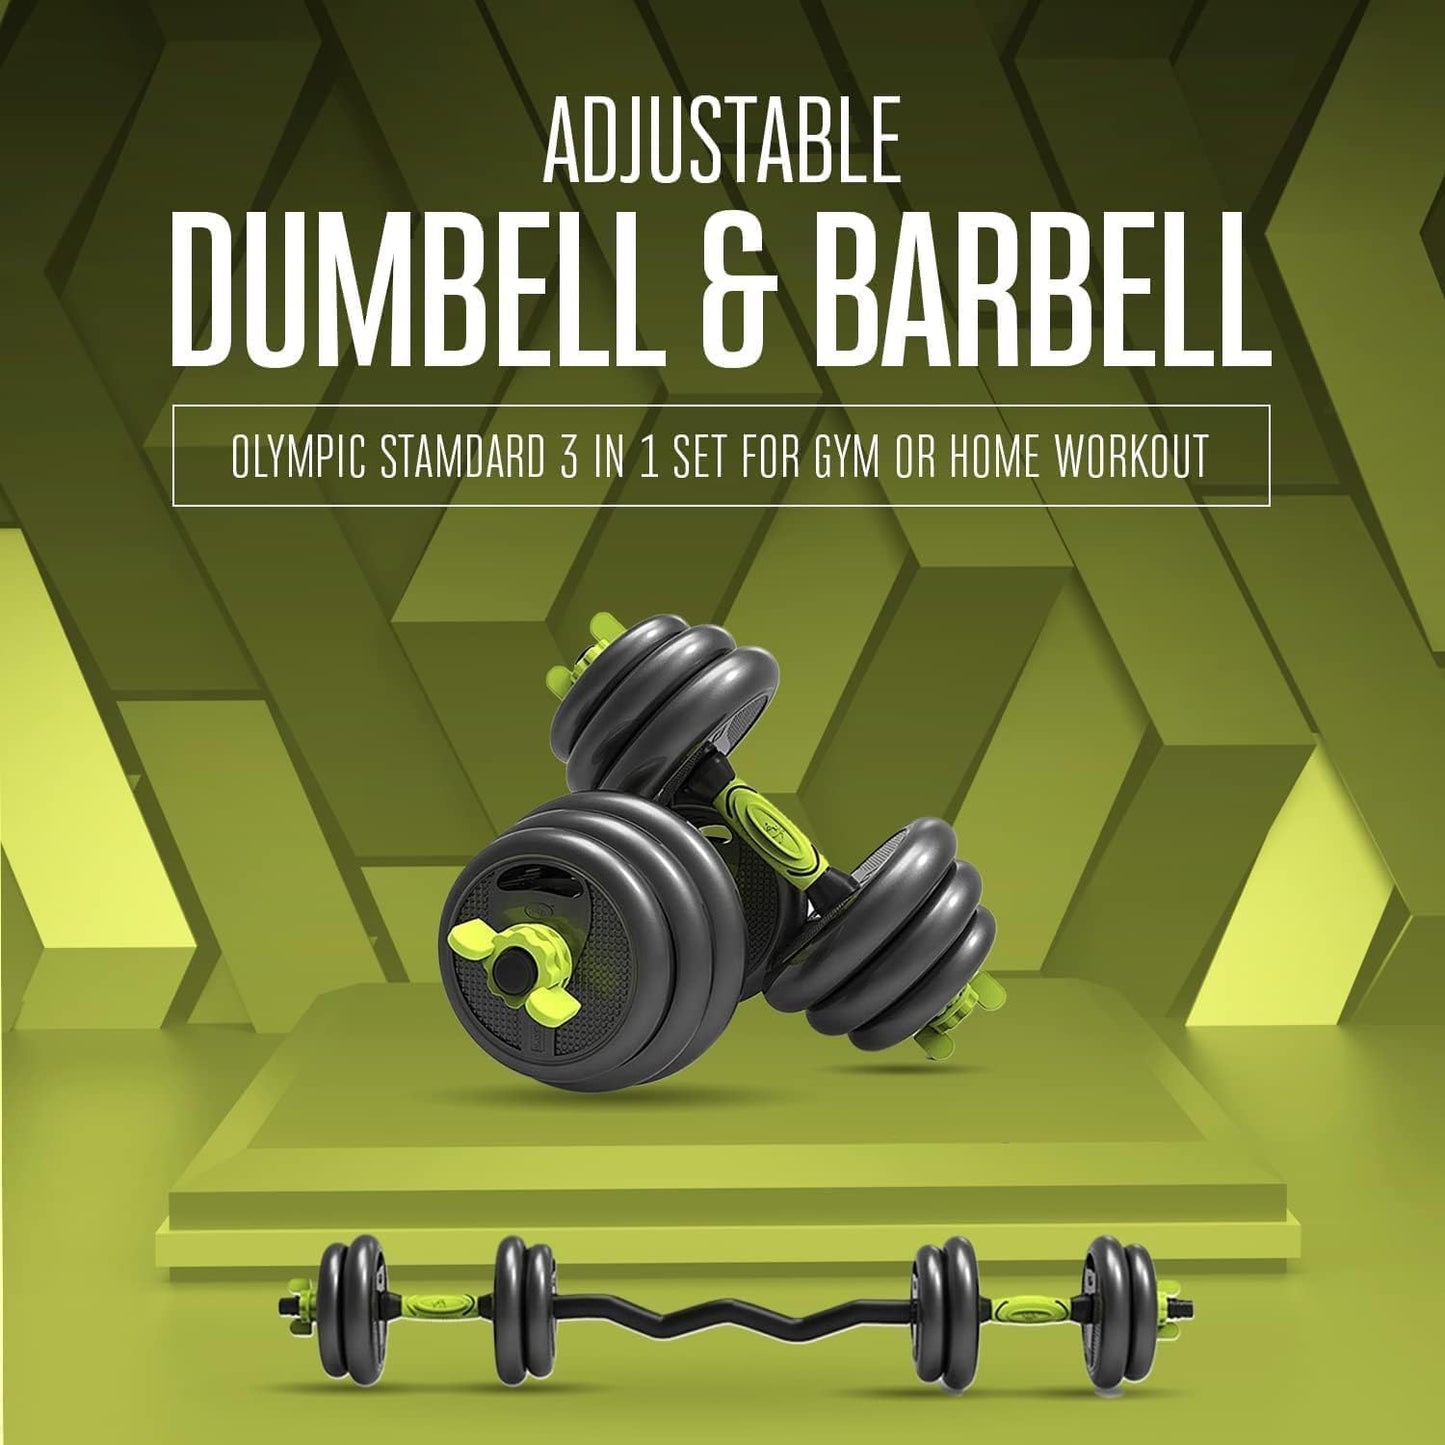 Strongway® Adjustable 6 in 1 Dumbbell Straight and Curl Barbell Kettlebell Push Up Set - 20KG 30KG 40KG SETS - Weight Lifting for Home Gym Fitness